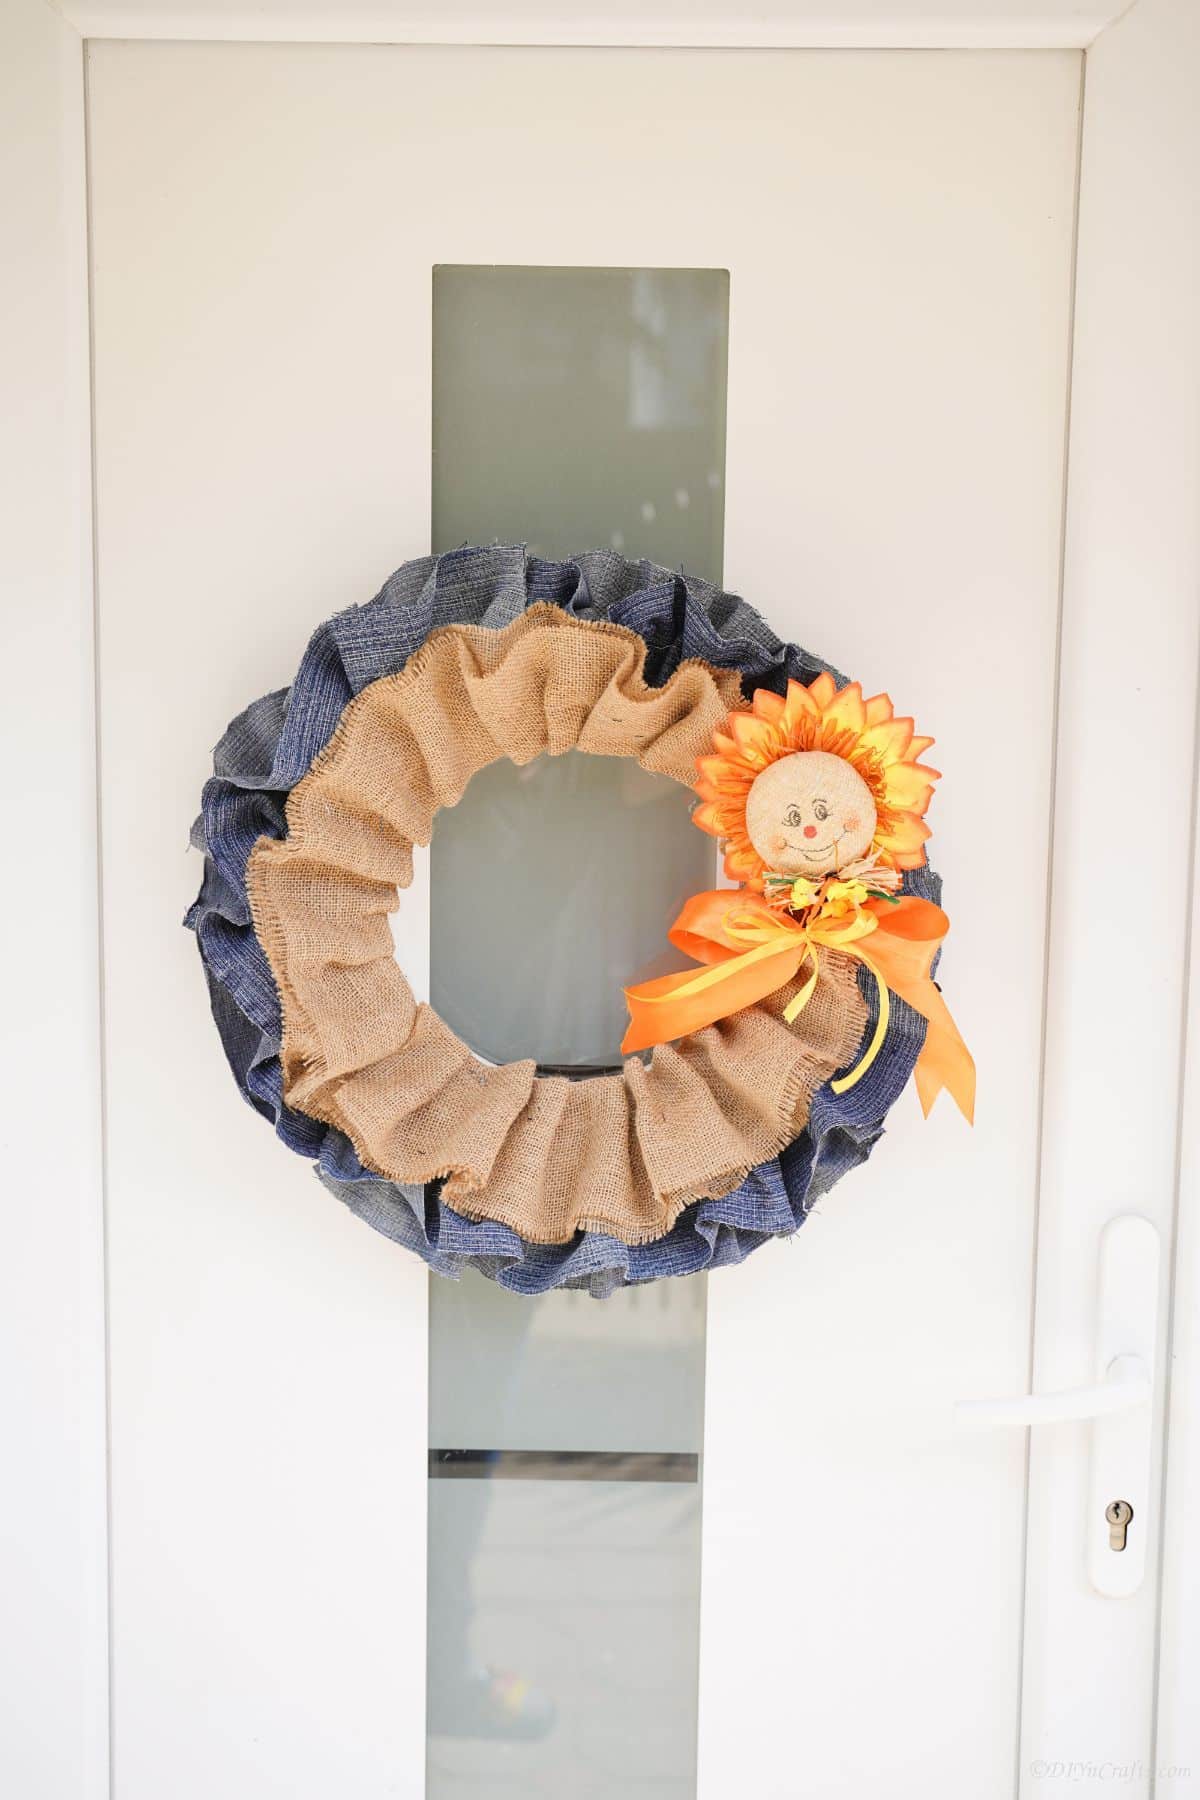 denim and burlap wreath hanging on white door with glass panel